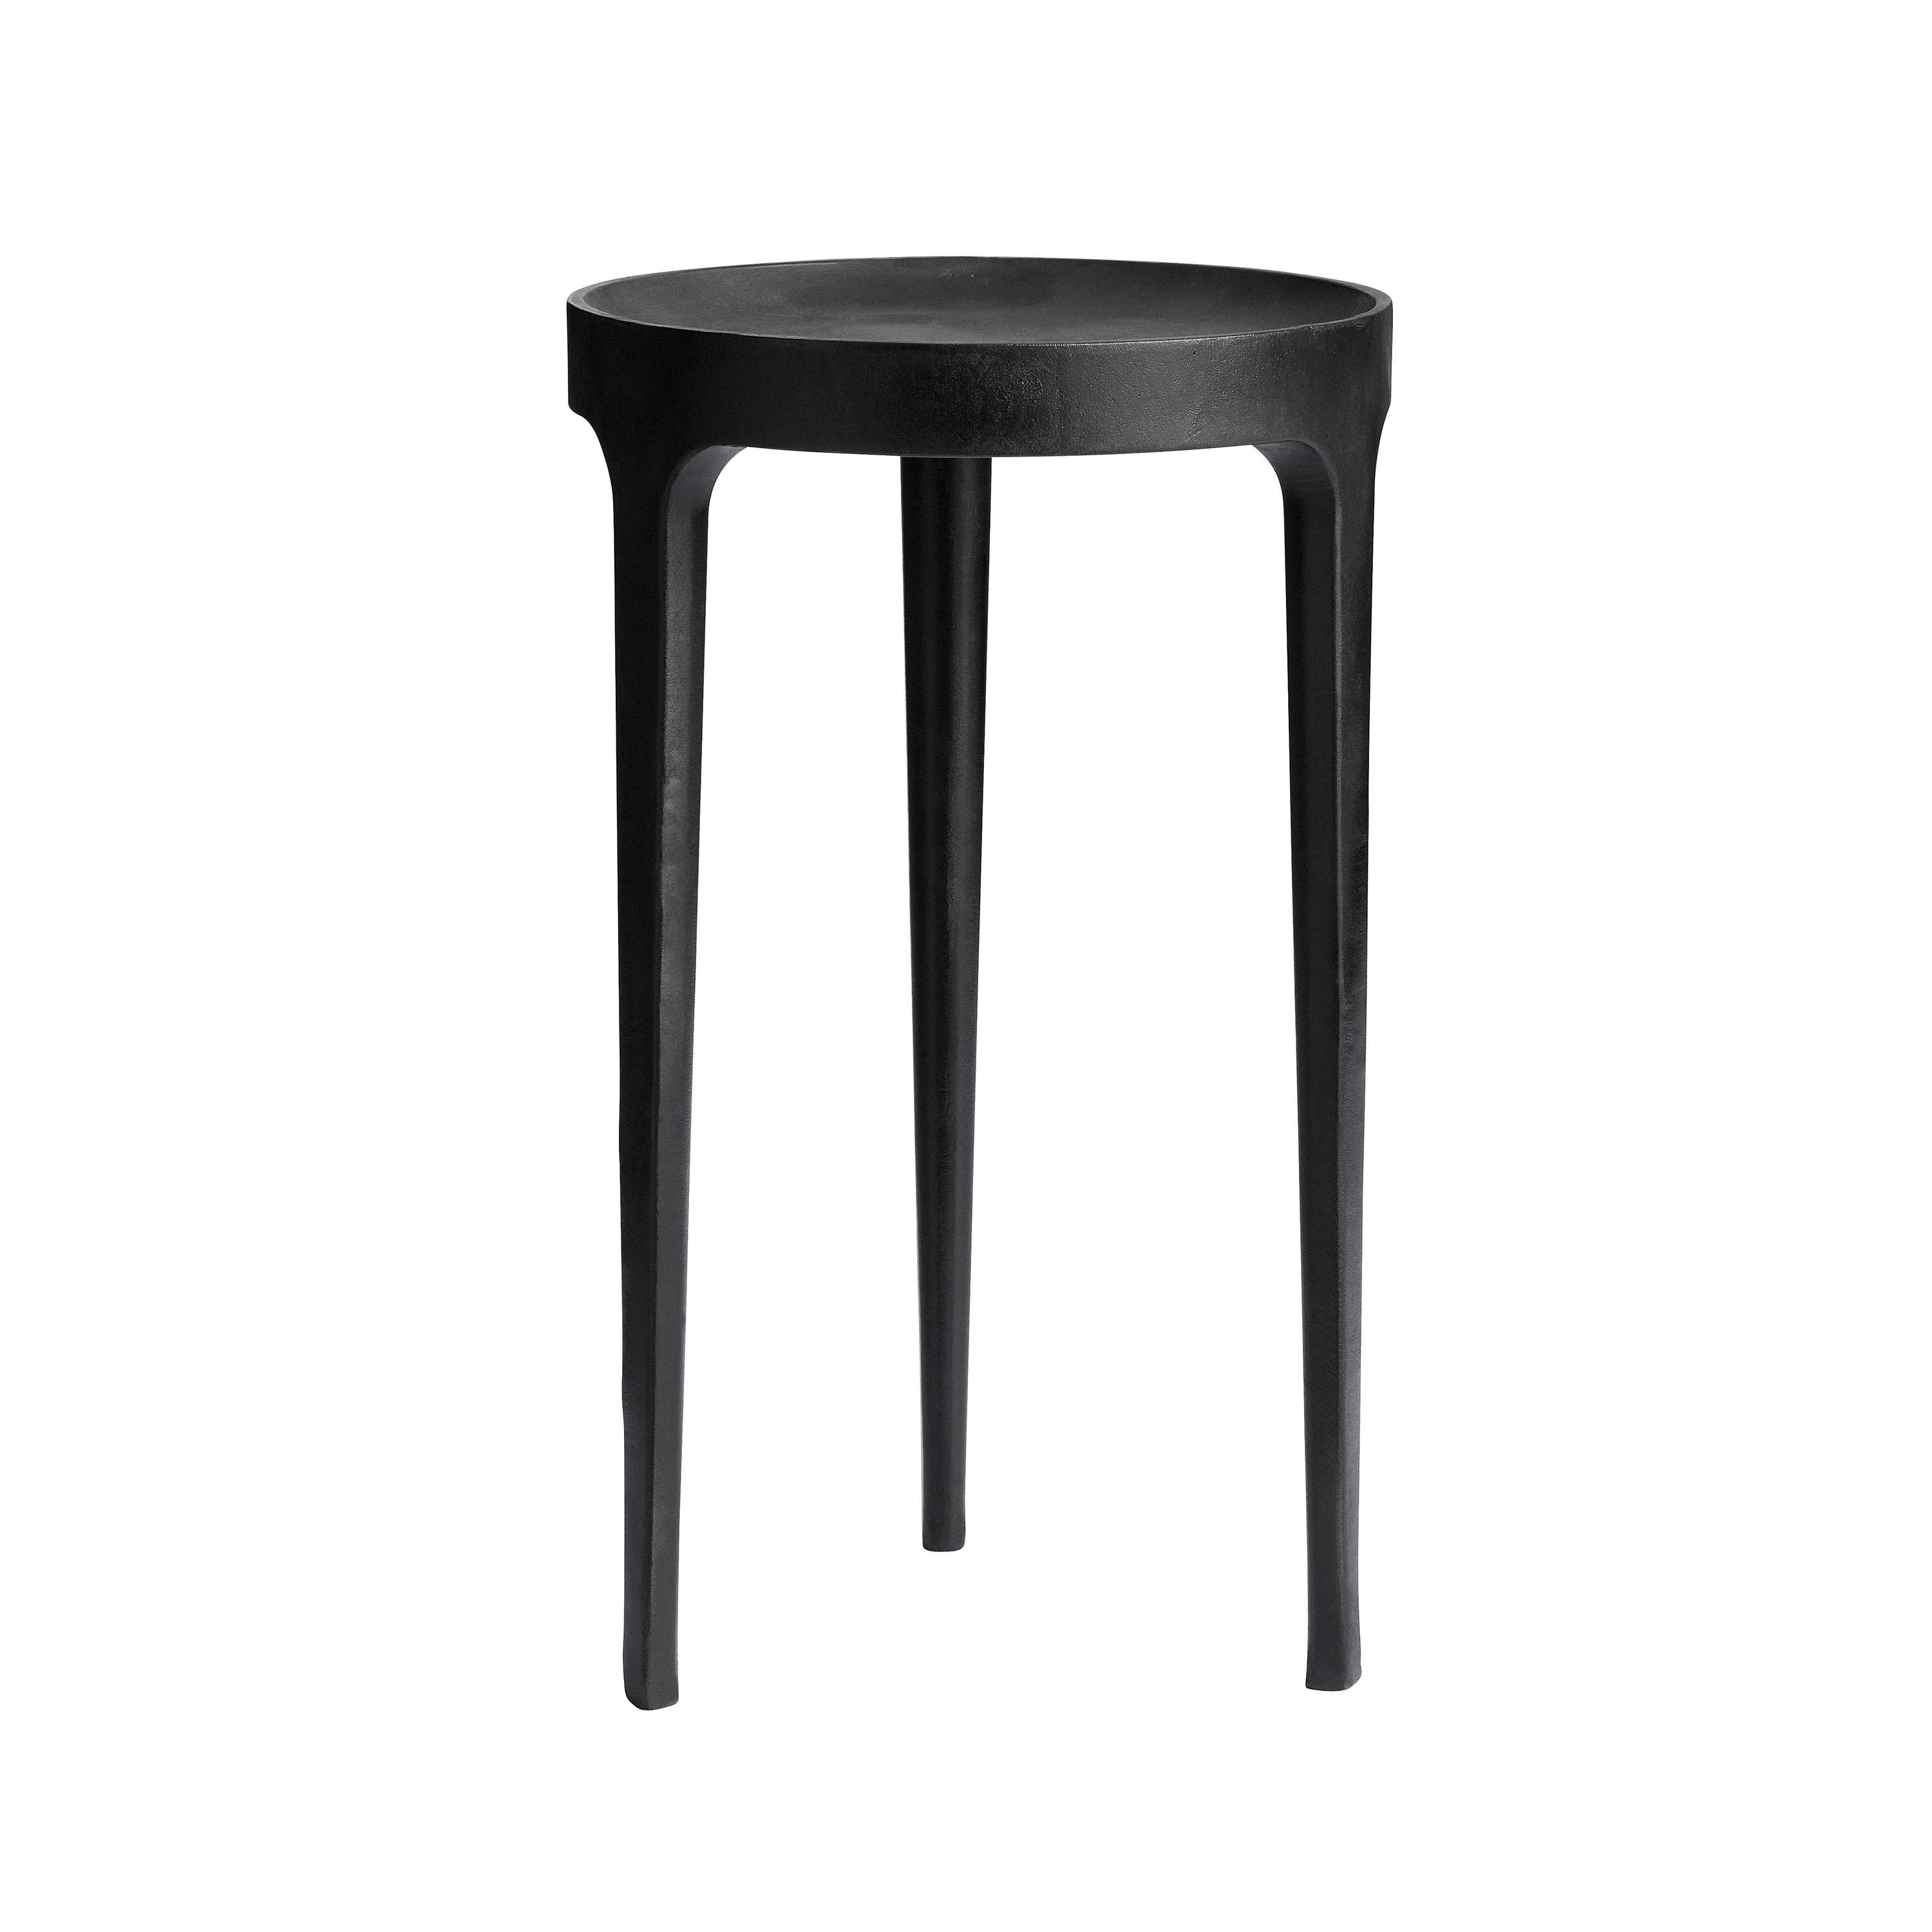 Danish Contemporary Coffee Table 'Ghost' by Fogia, Black Aluminium For Sale